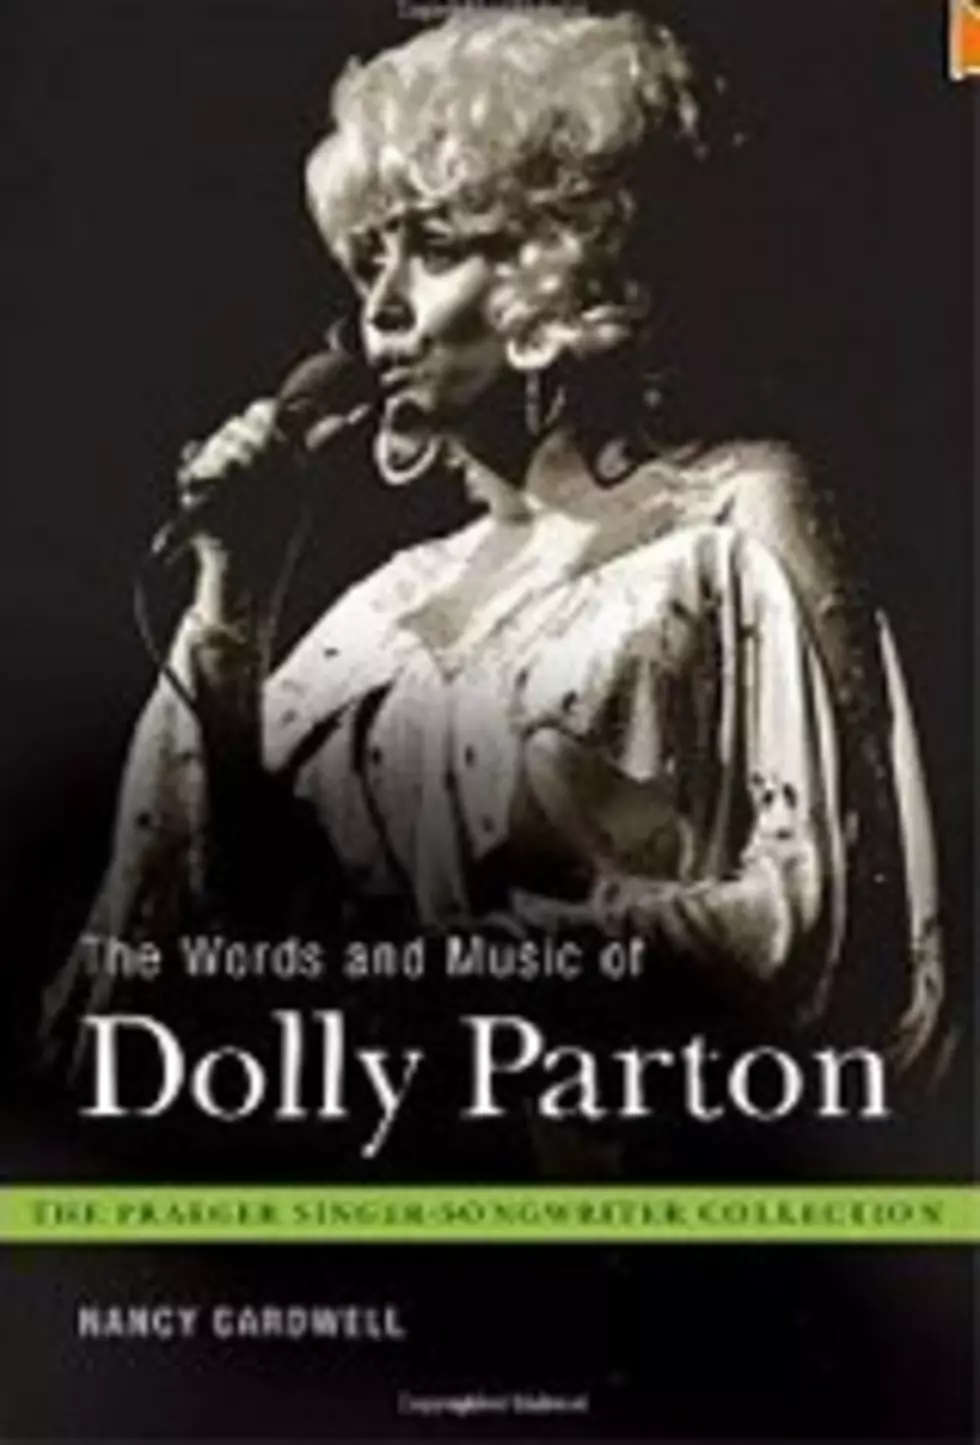 Dolly Parton’s ‘Words and Music’ Examined in New Book